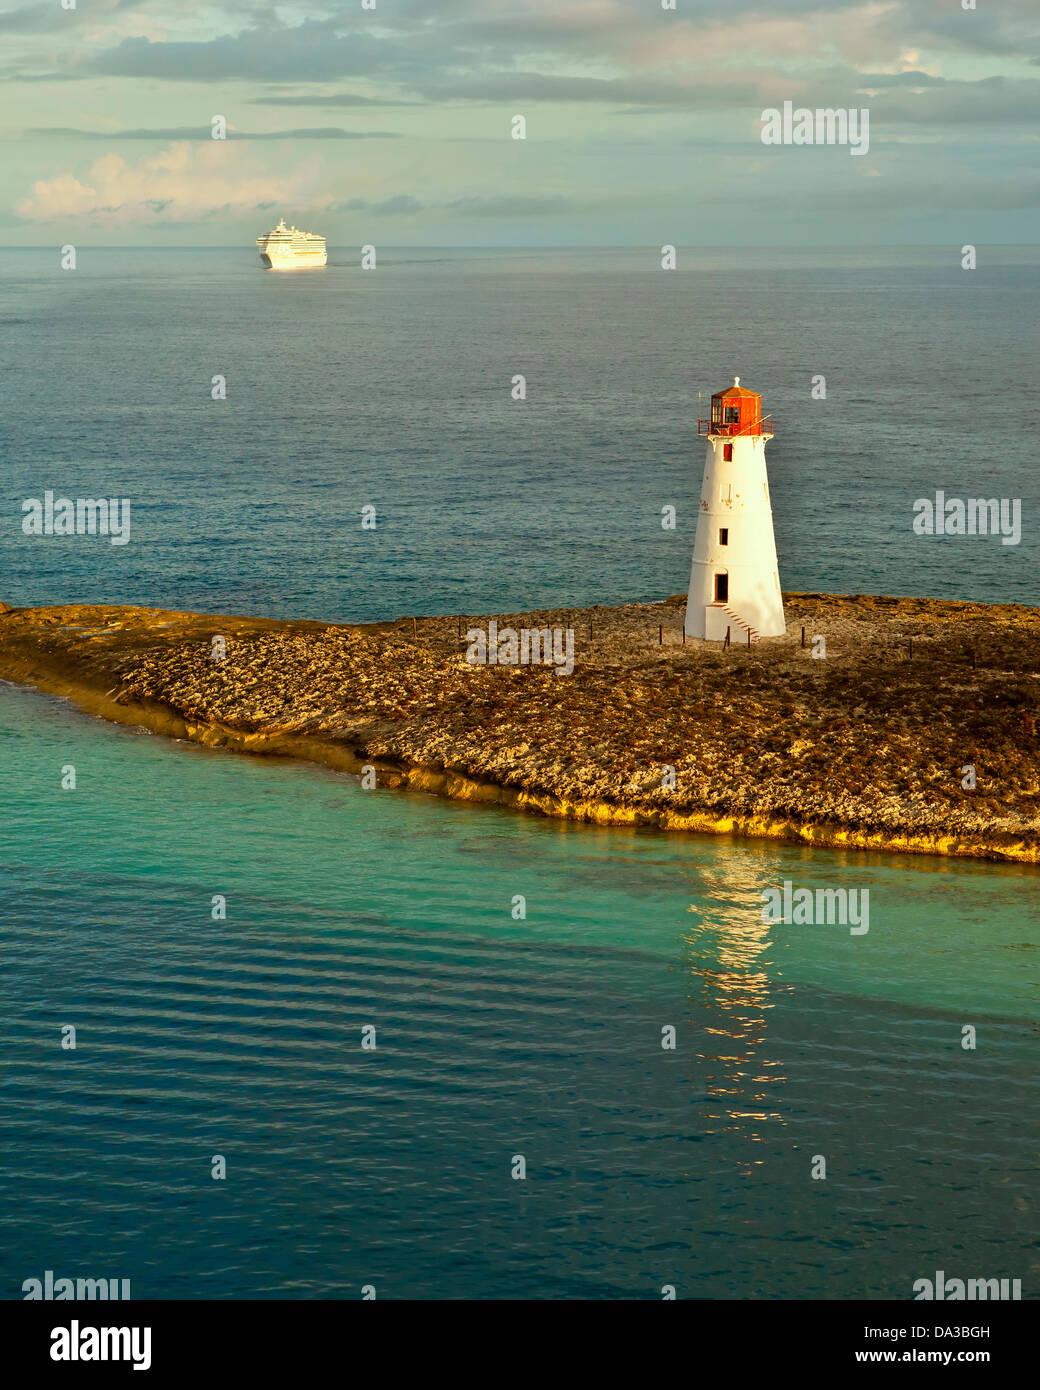 Coming Into Port Stock Photos & Coming Into Port Stock Images - Alamy1040 x 1390